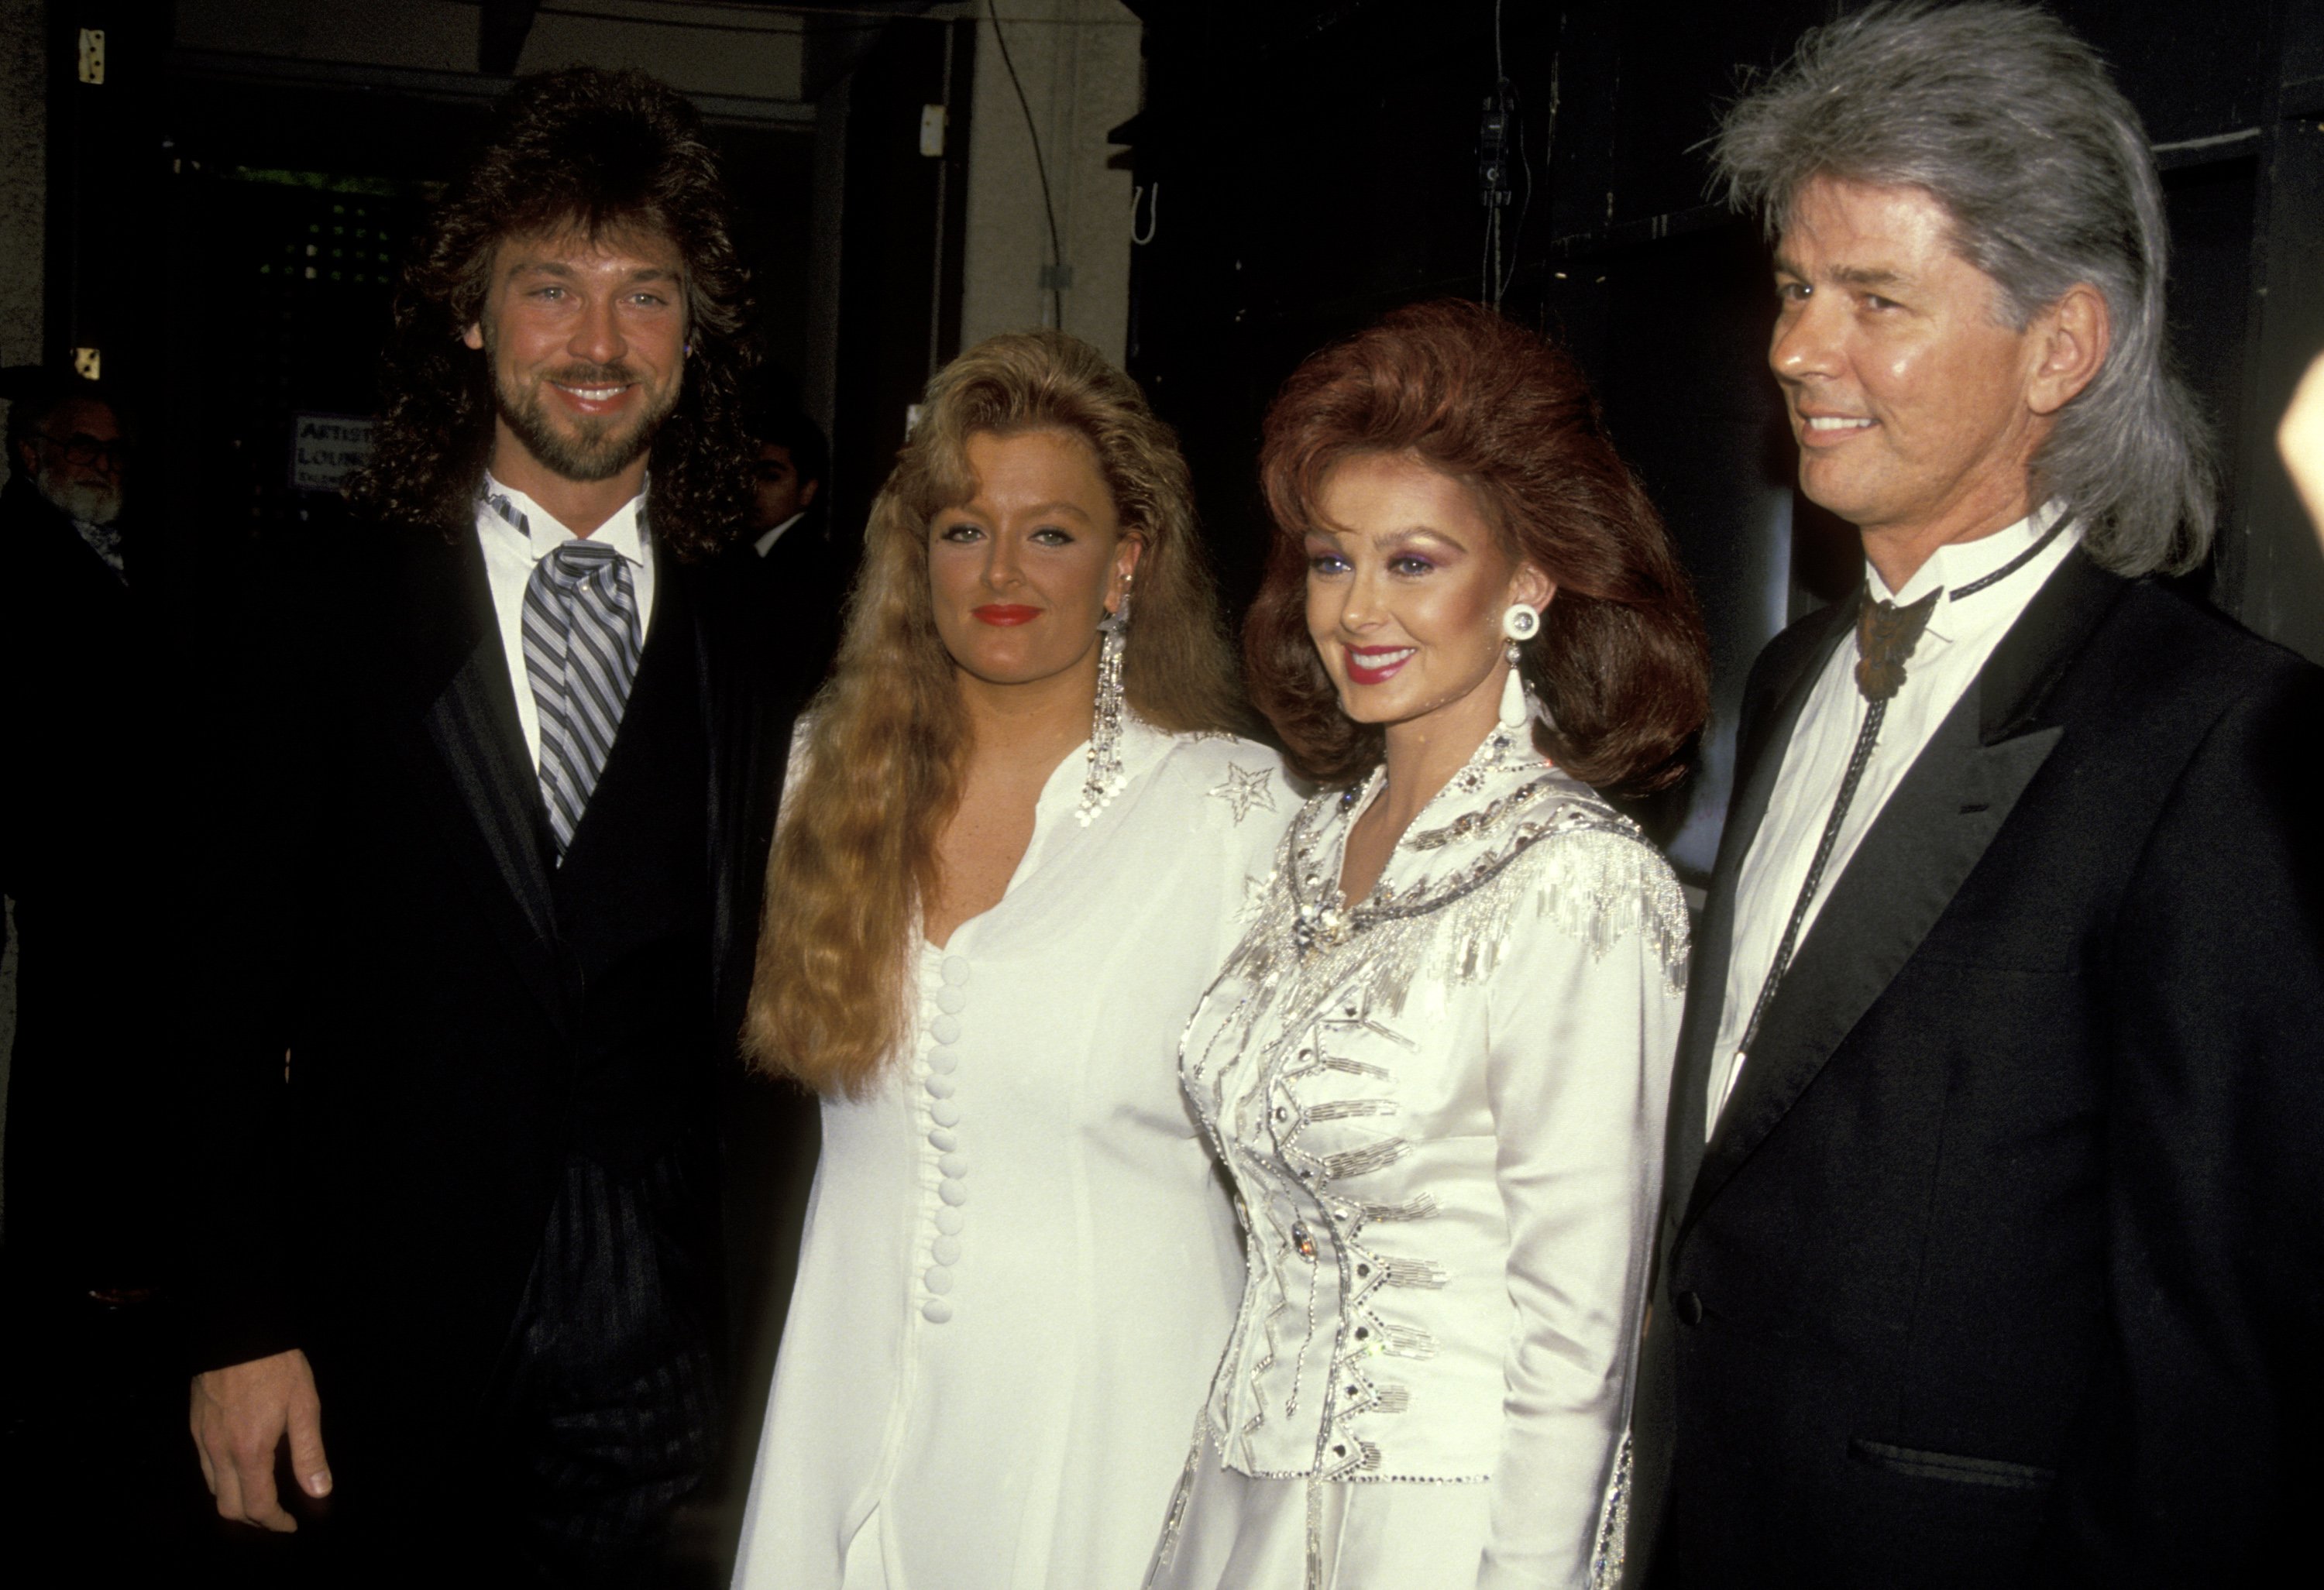 Wynonna Judd and fiance Tony King and Naomi Judd and Husband Larry Strickland. | Source: Getty Images